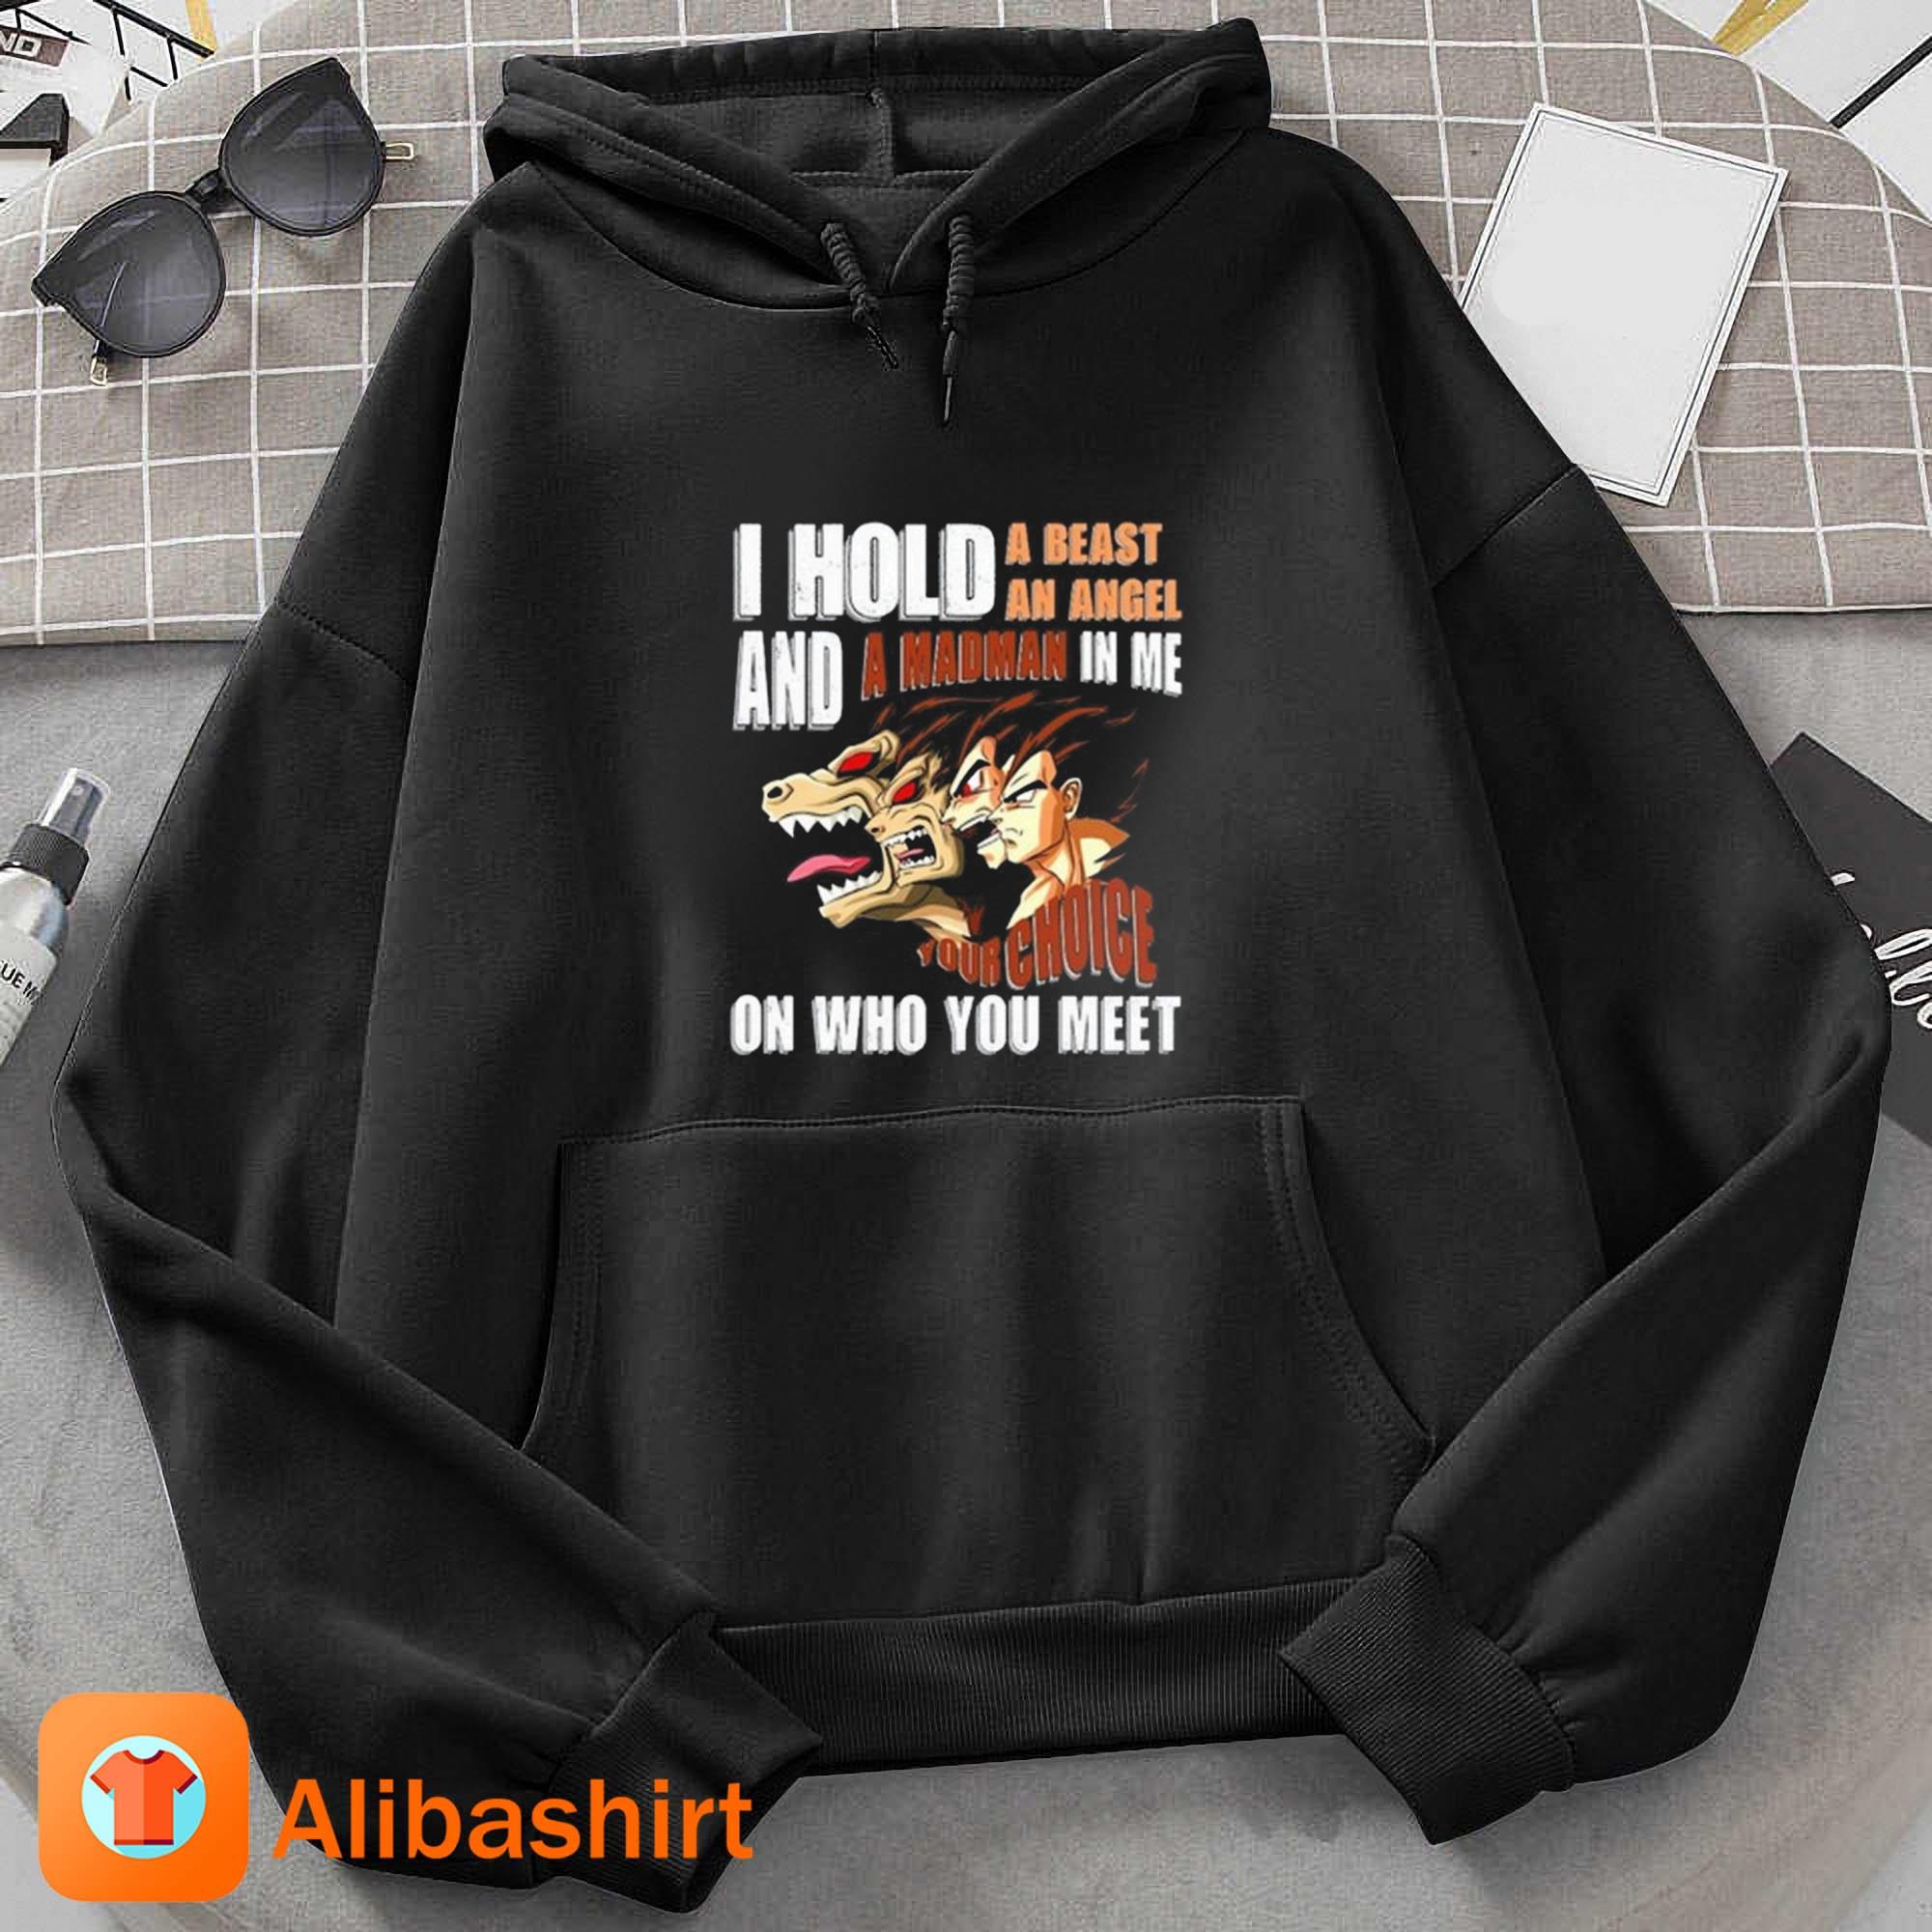 I Hold A Beast An Angel And A Madman In Me Your Choice On Who You Meet Dragon Ball 2023 Shirt Hoodie